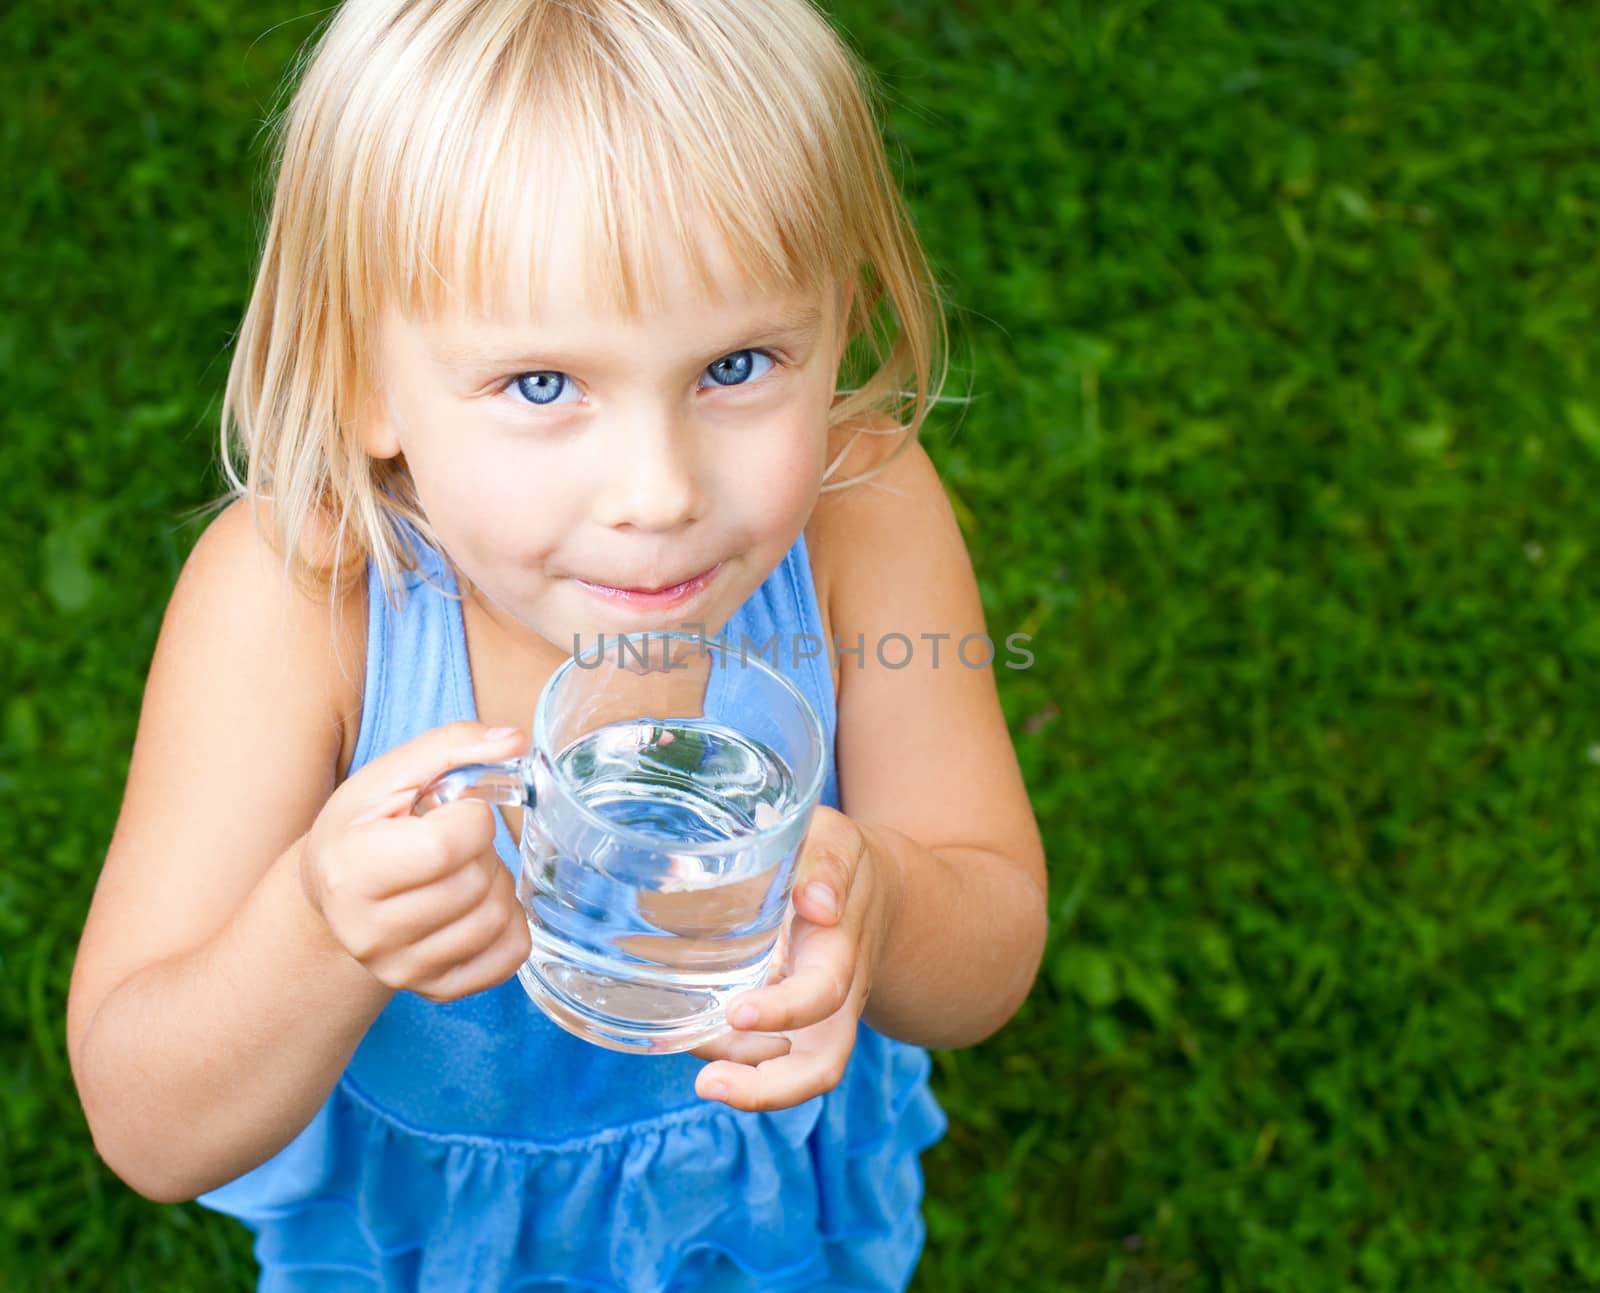 Little girl holding glass of water outdoors